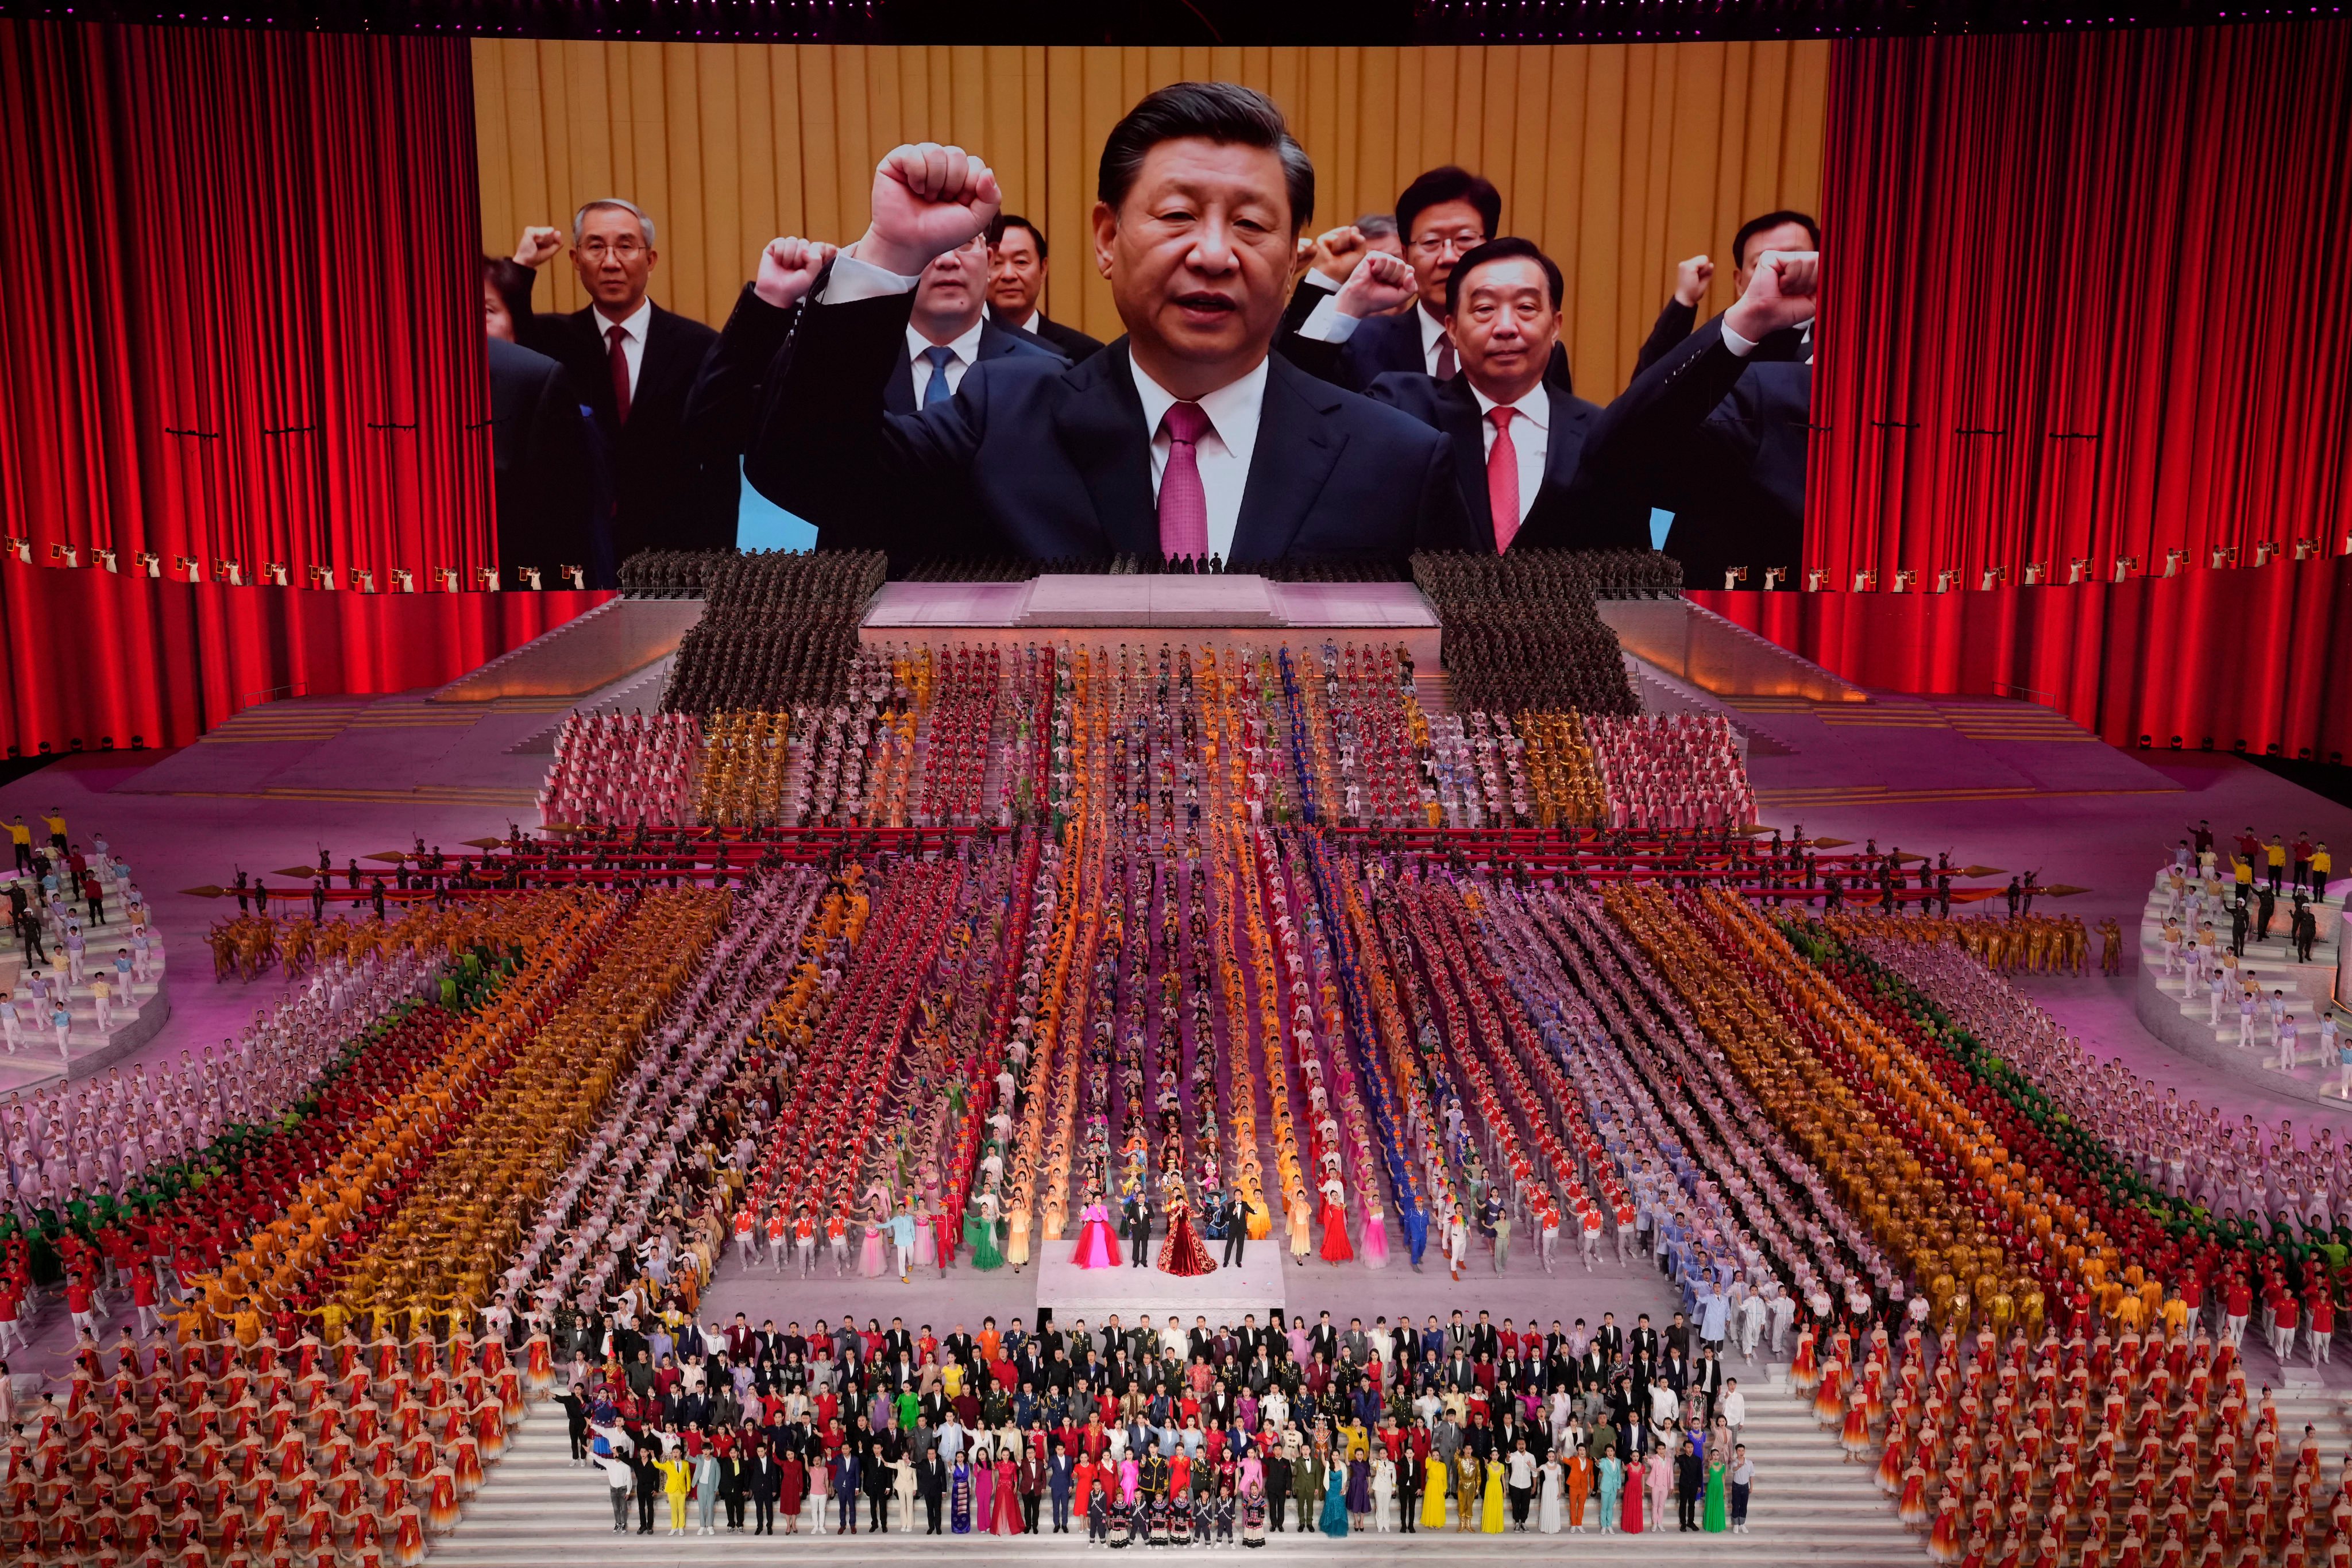 Strong acclaim for China’s President Xi Jinping from senior communist party officials comes in the lead-up to the 20th Party Congress. Photo: AP Photo